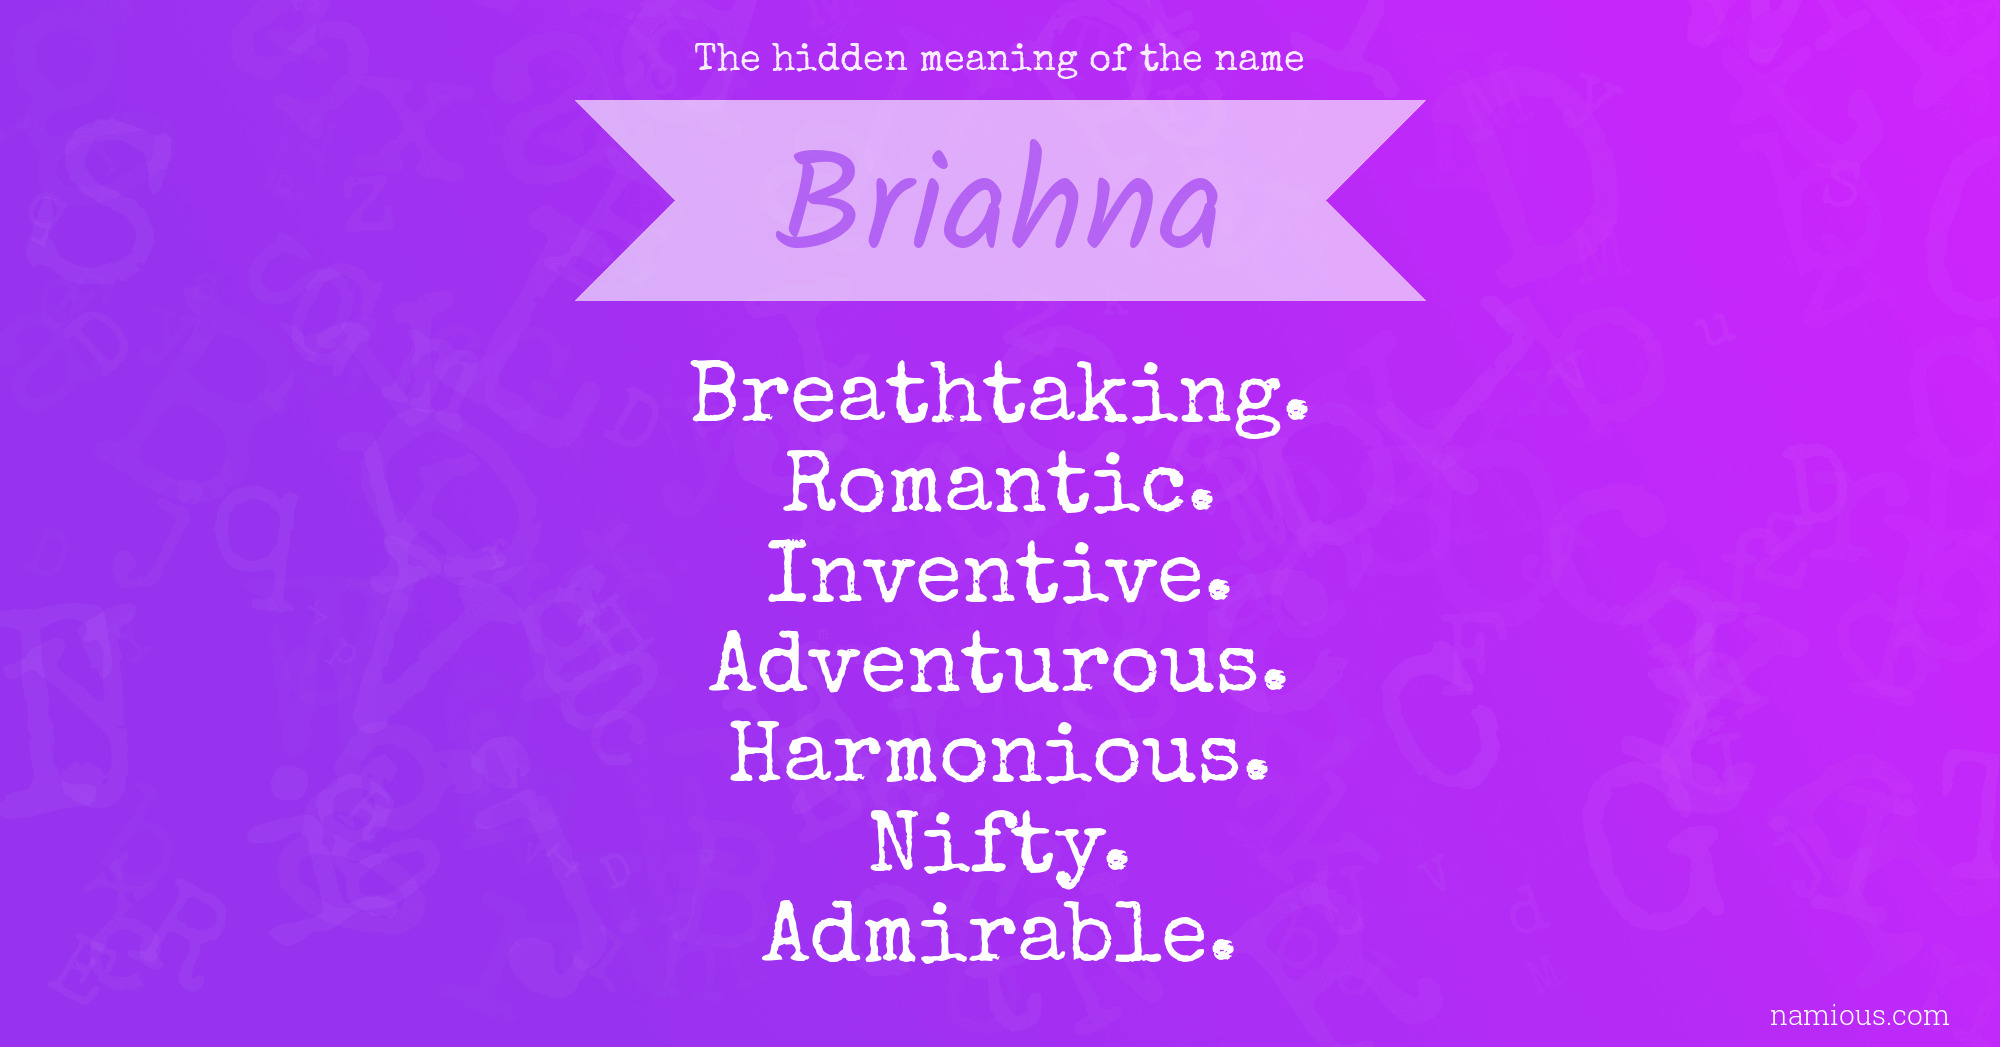 The hidden meaning of the name Briahna